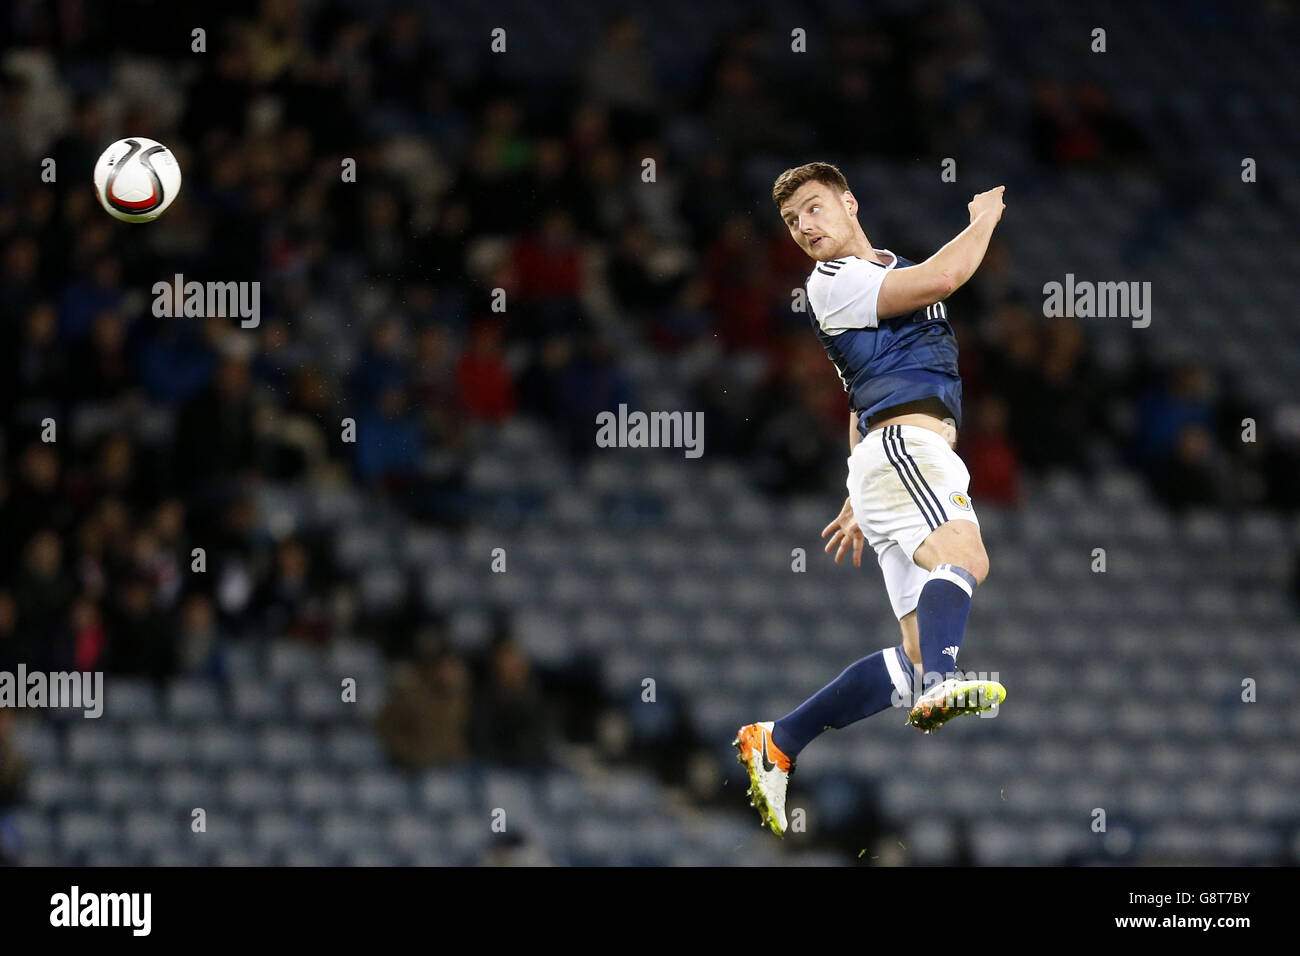 Scotland's Chris Martin in action against Denmark during an International Friendly at Hampden Park, Glasgow. PRESS ASSOCIATION Photo. Picture date: Tuesday March 29, 2016. See PA story SOCCER Scotland. Photo credit should read: Danny Lawson/PA Wire. Stock Photo